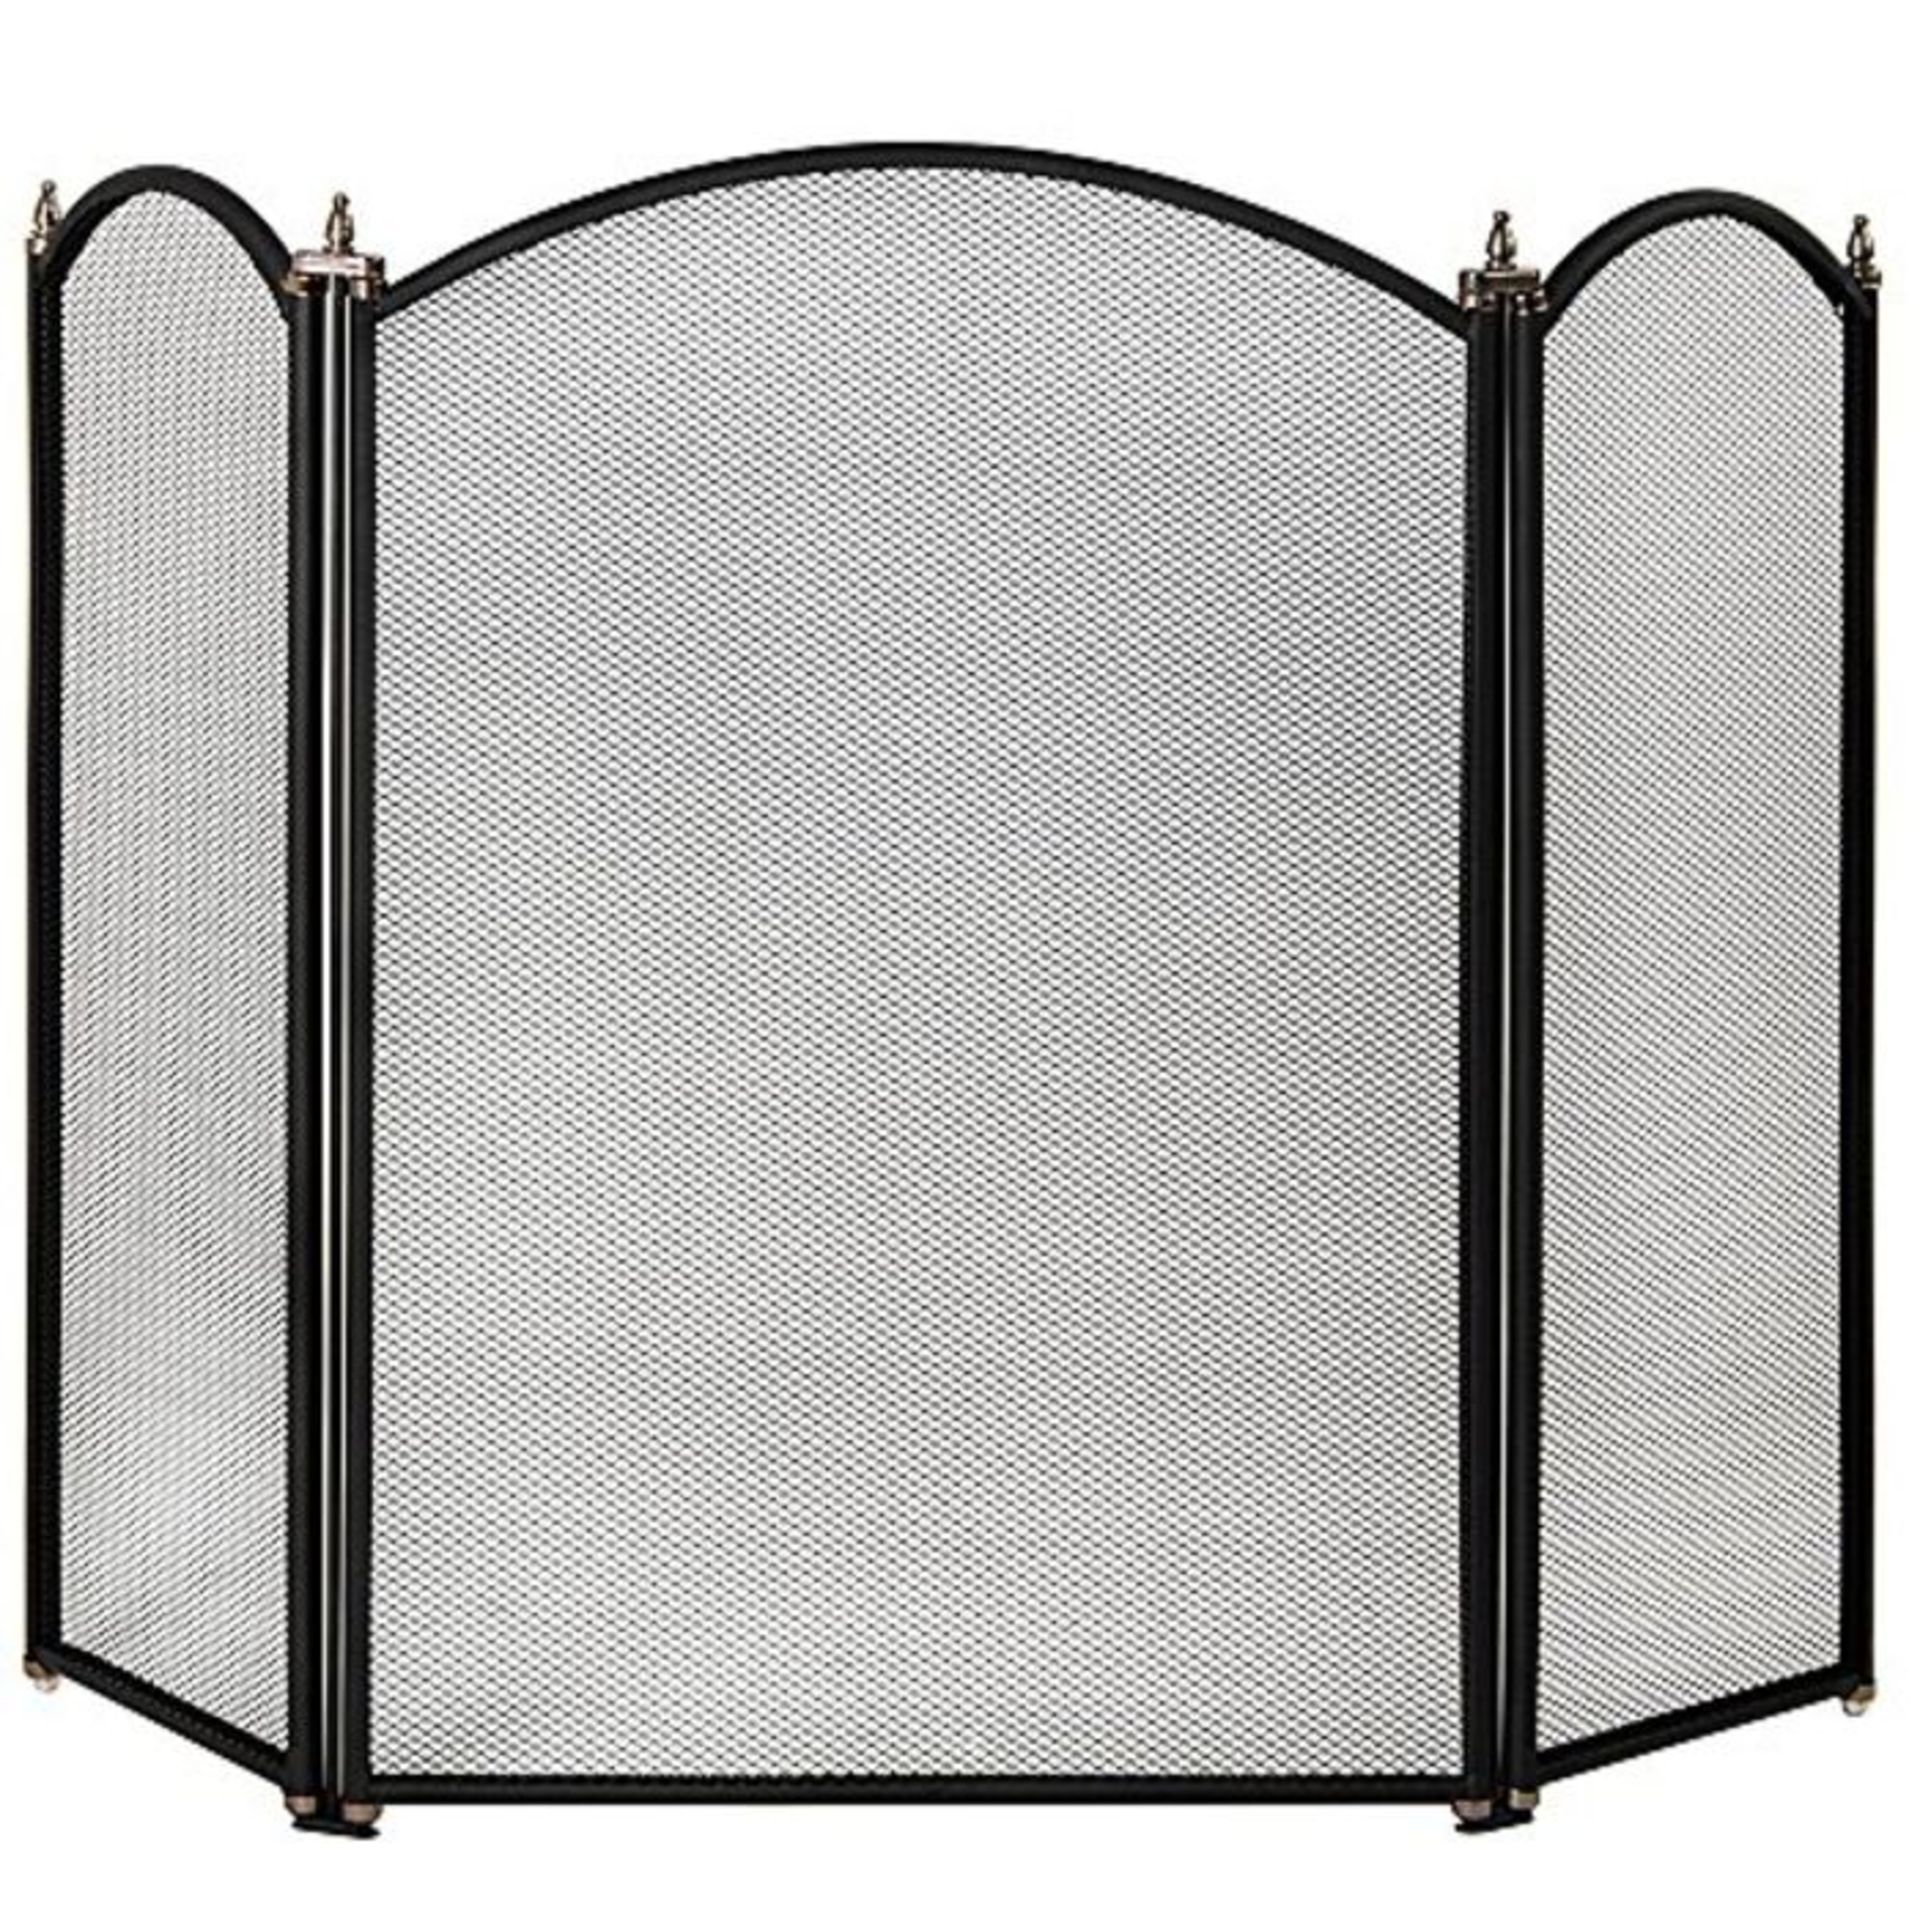 [INCOMPLETE] Home Discount® Selby 3 Panel Fire Screen Spark Guard, Black